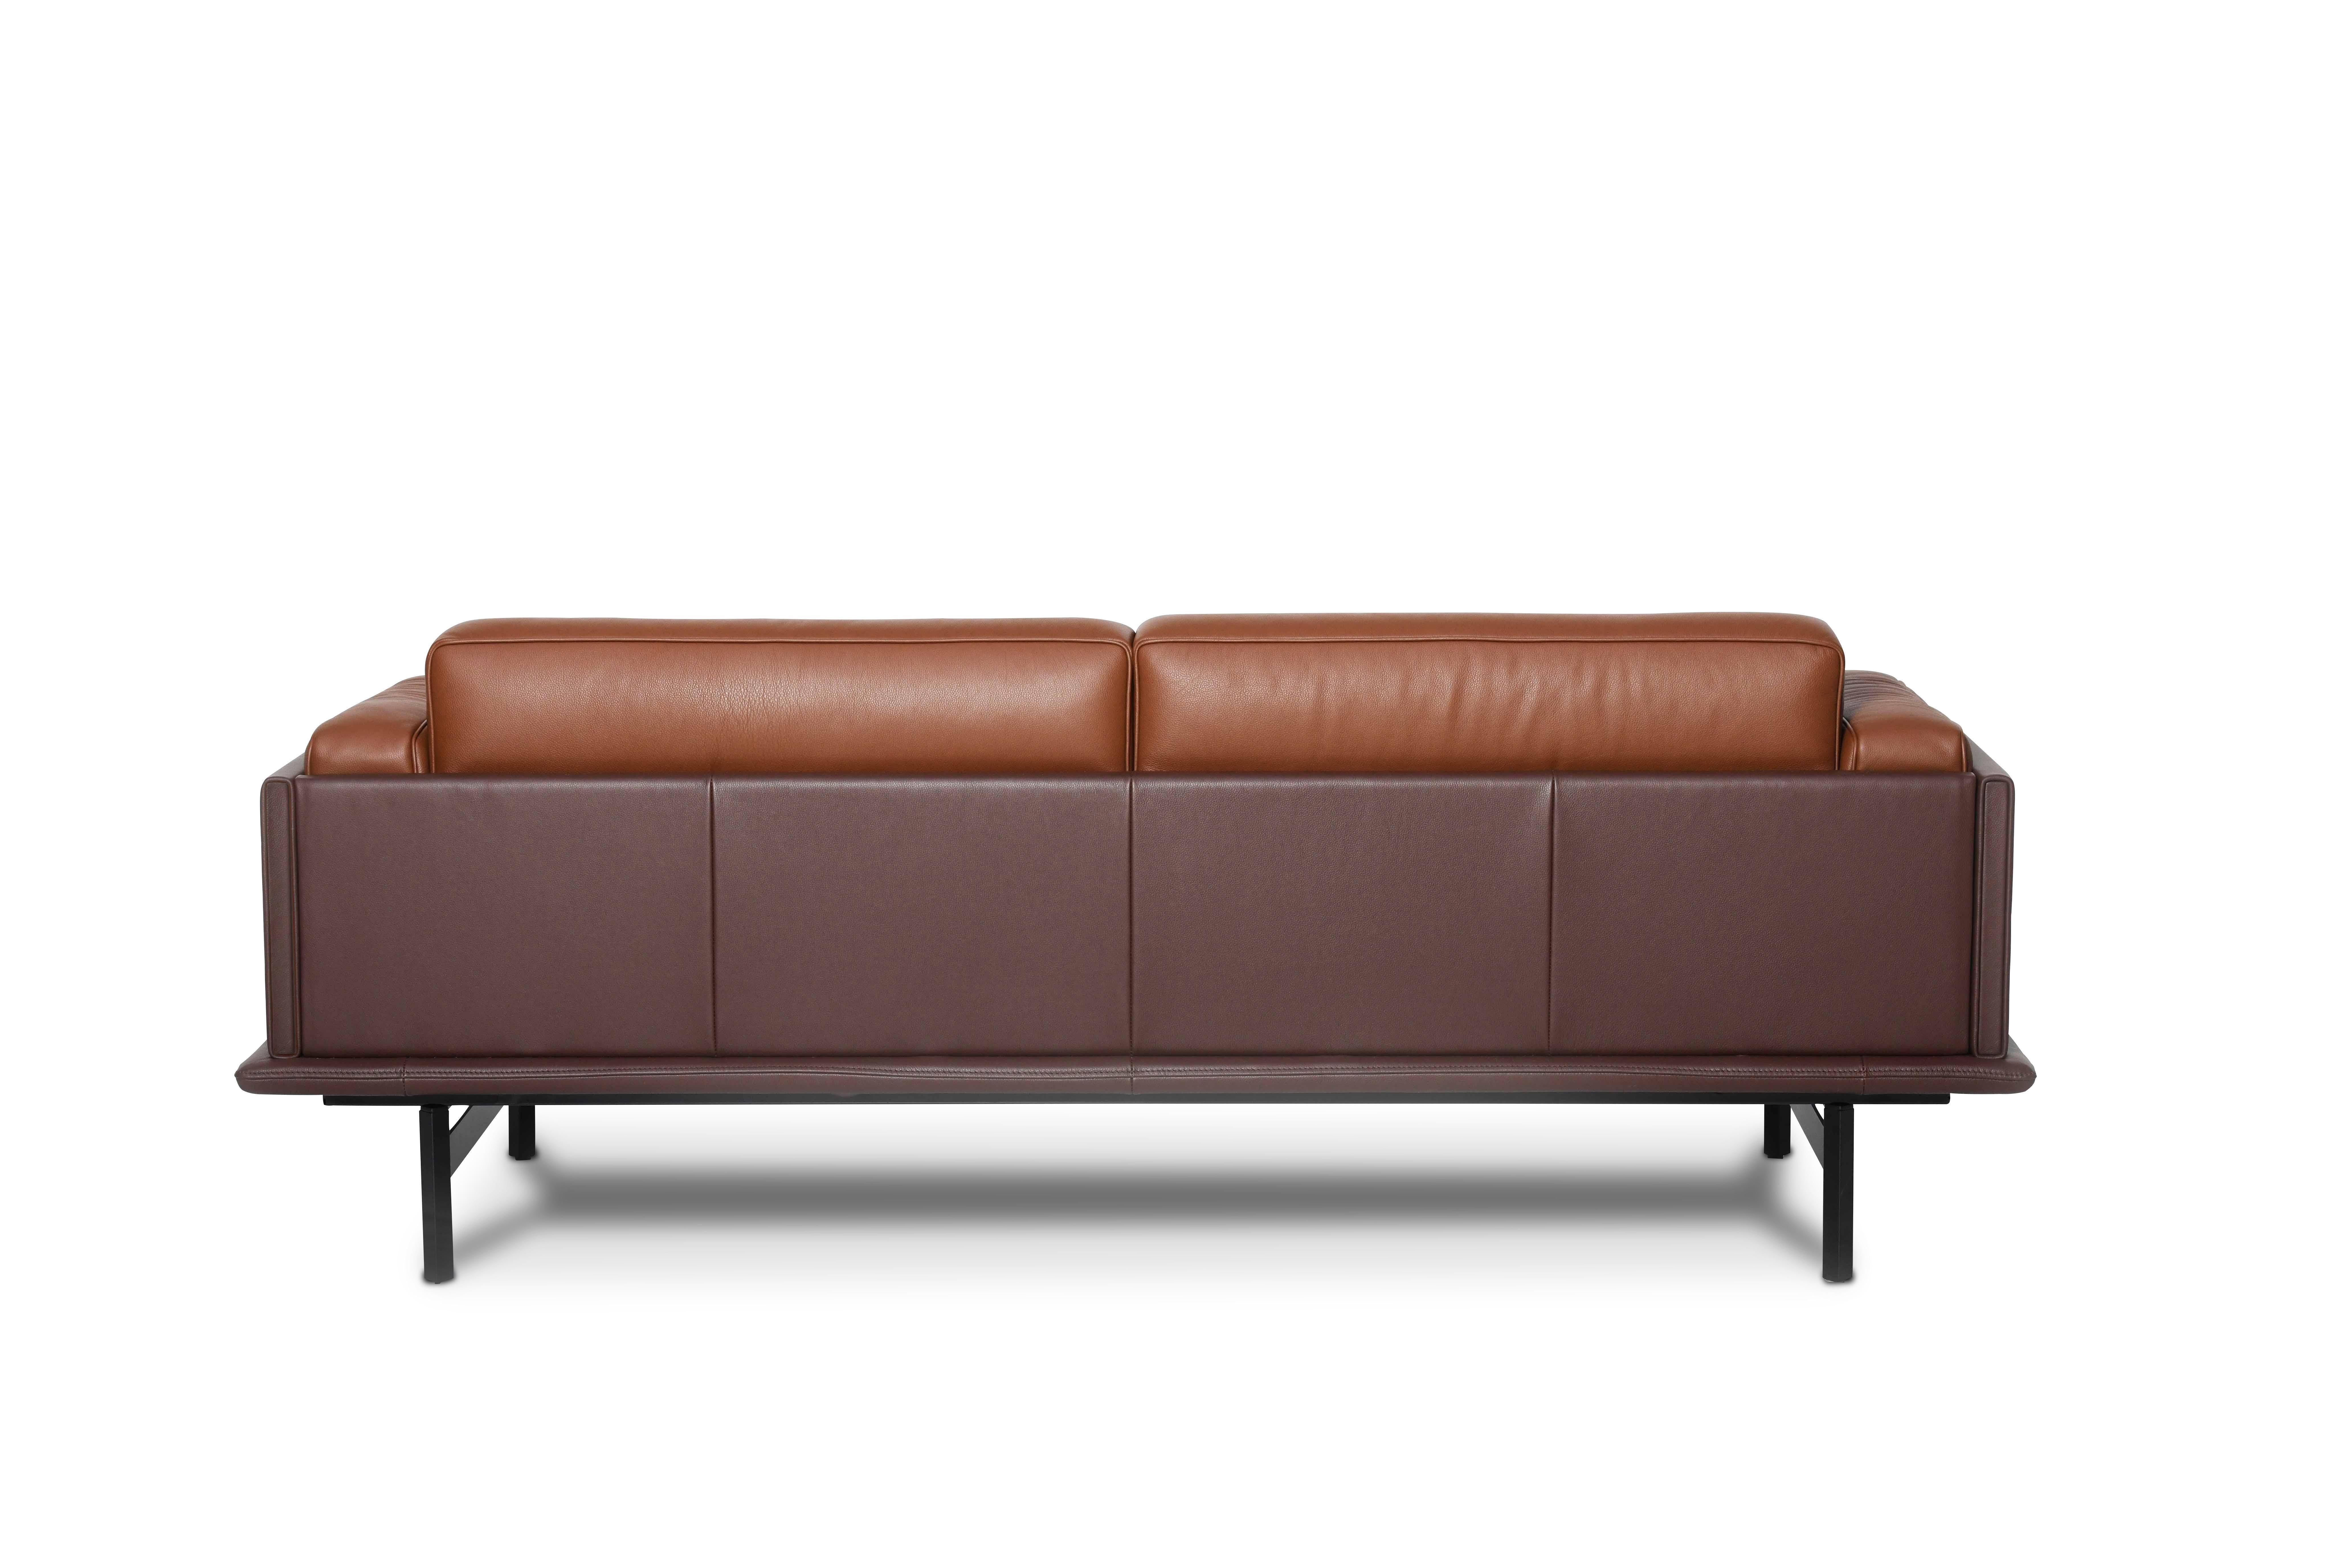 Modern De Sede DS-175 Small Two-Seat Sofa in Hazel Upholstery by Patrick Norguet For Sale